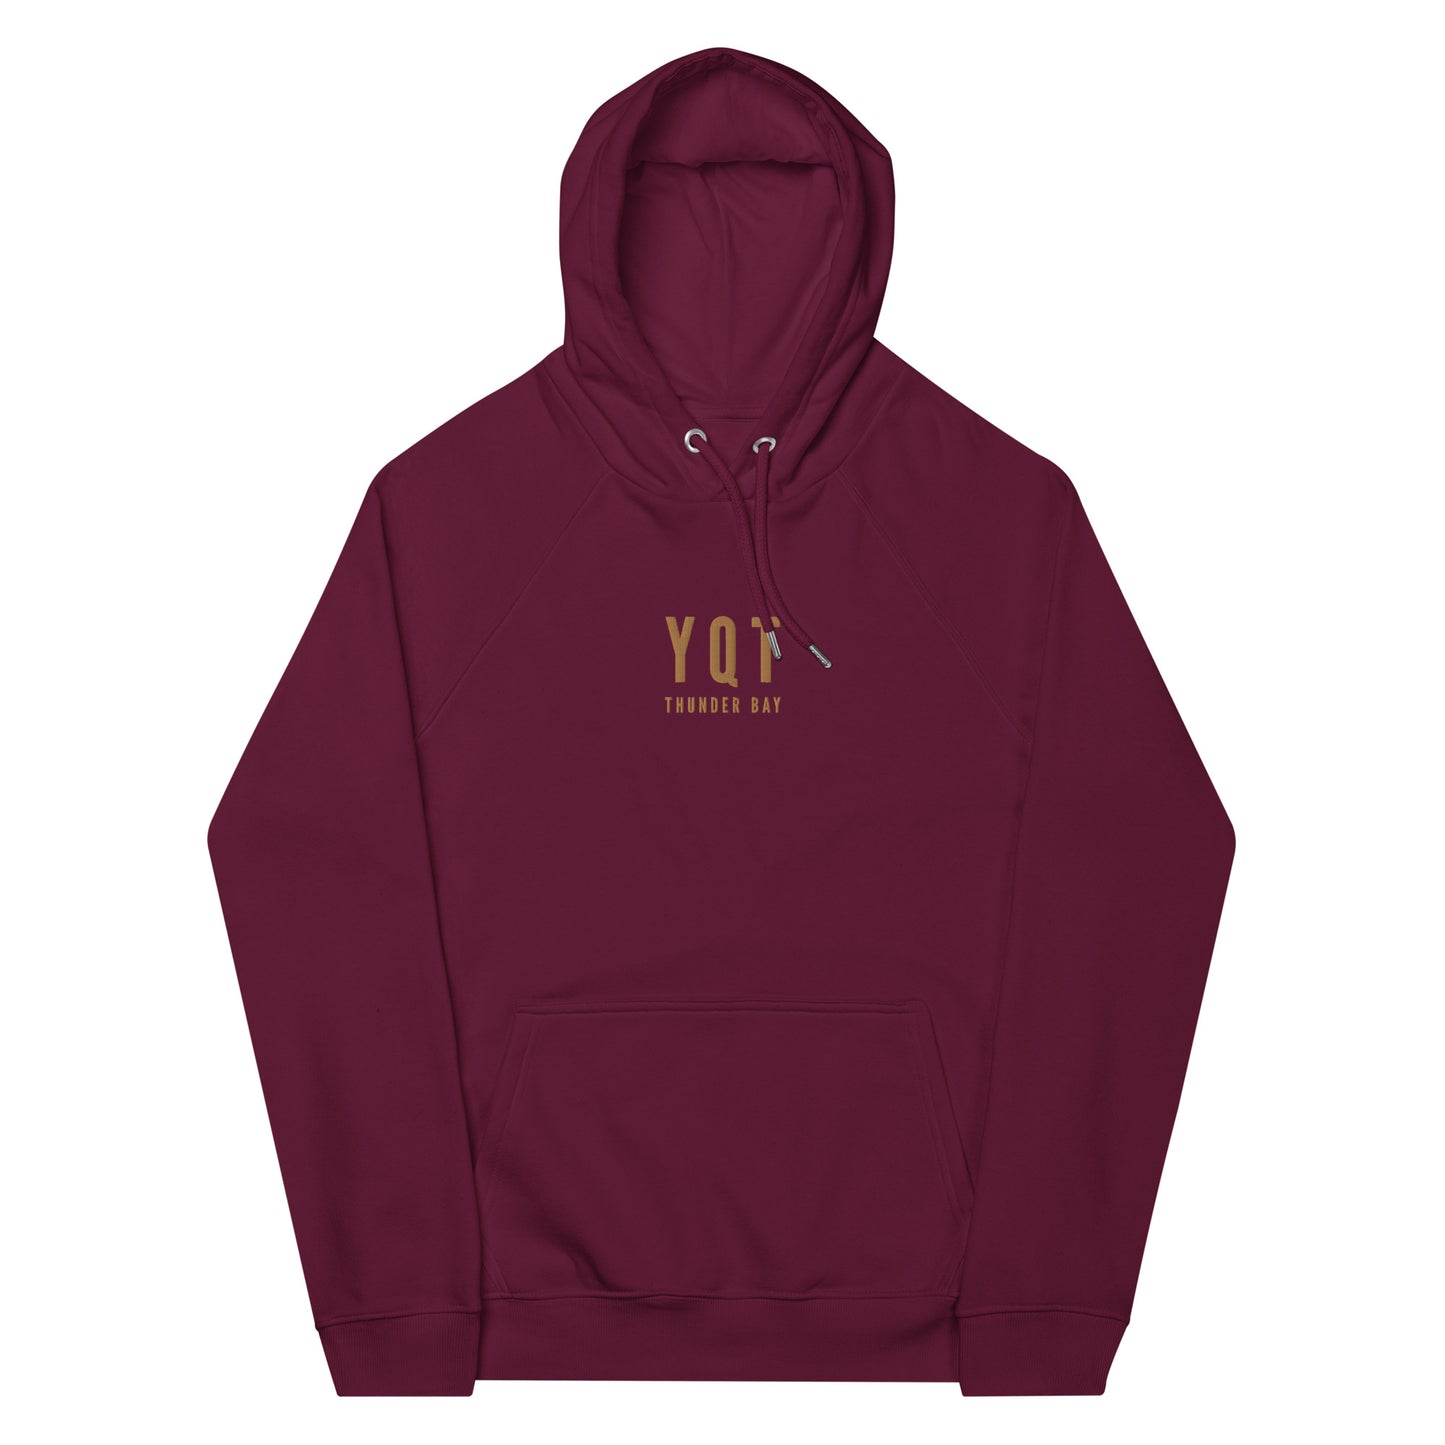 City Organic Hoodie - Old Gold • YQT Thunder Bay • YHM Designs - Image 11